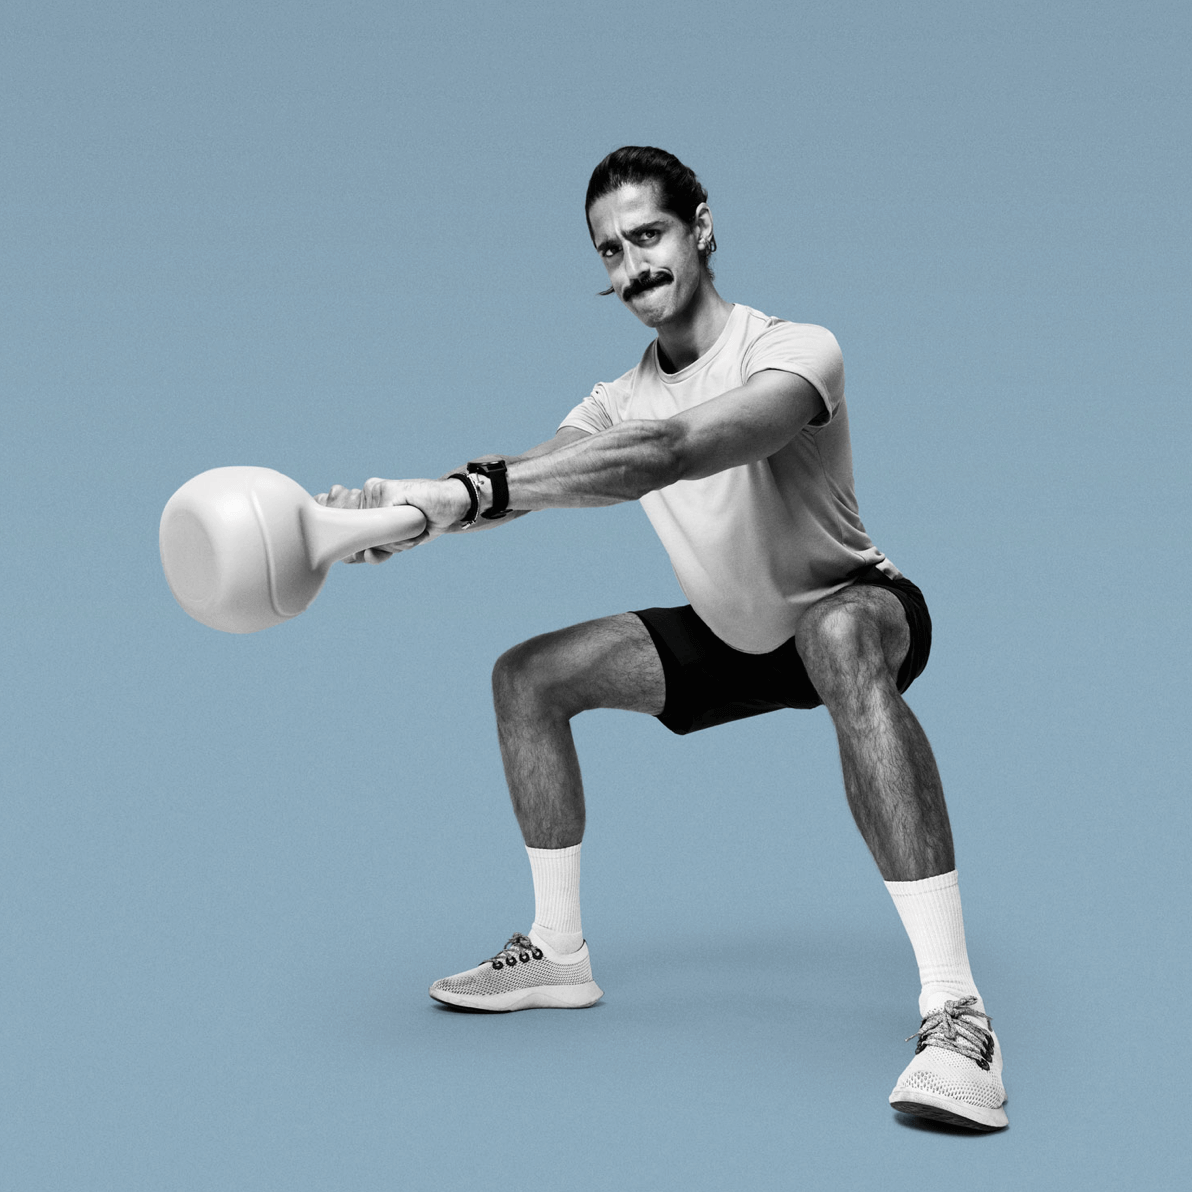 Movember campaign participant swinging a kettlebell.